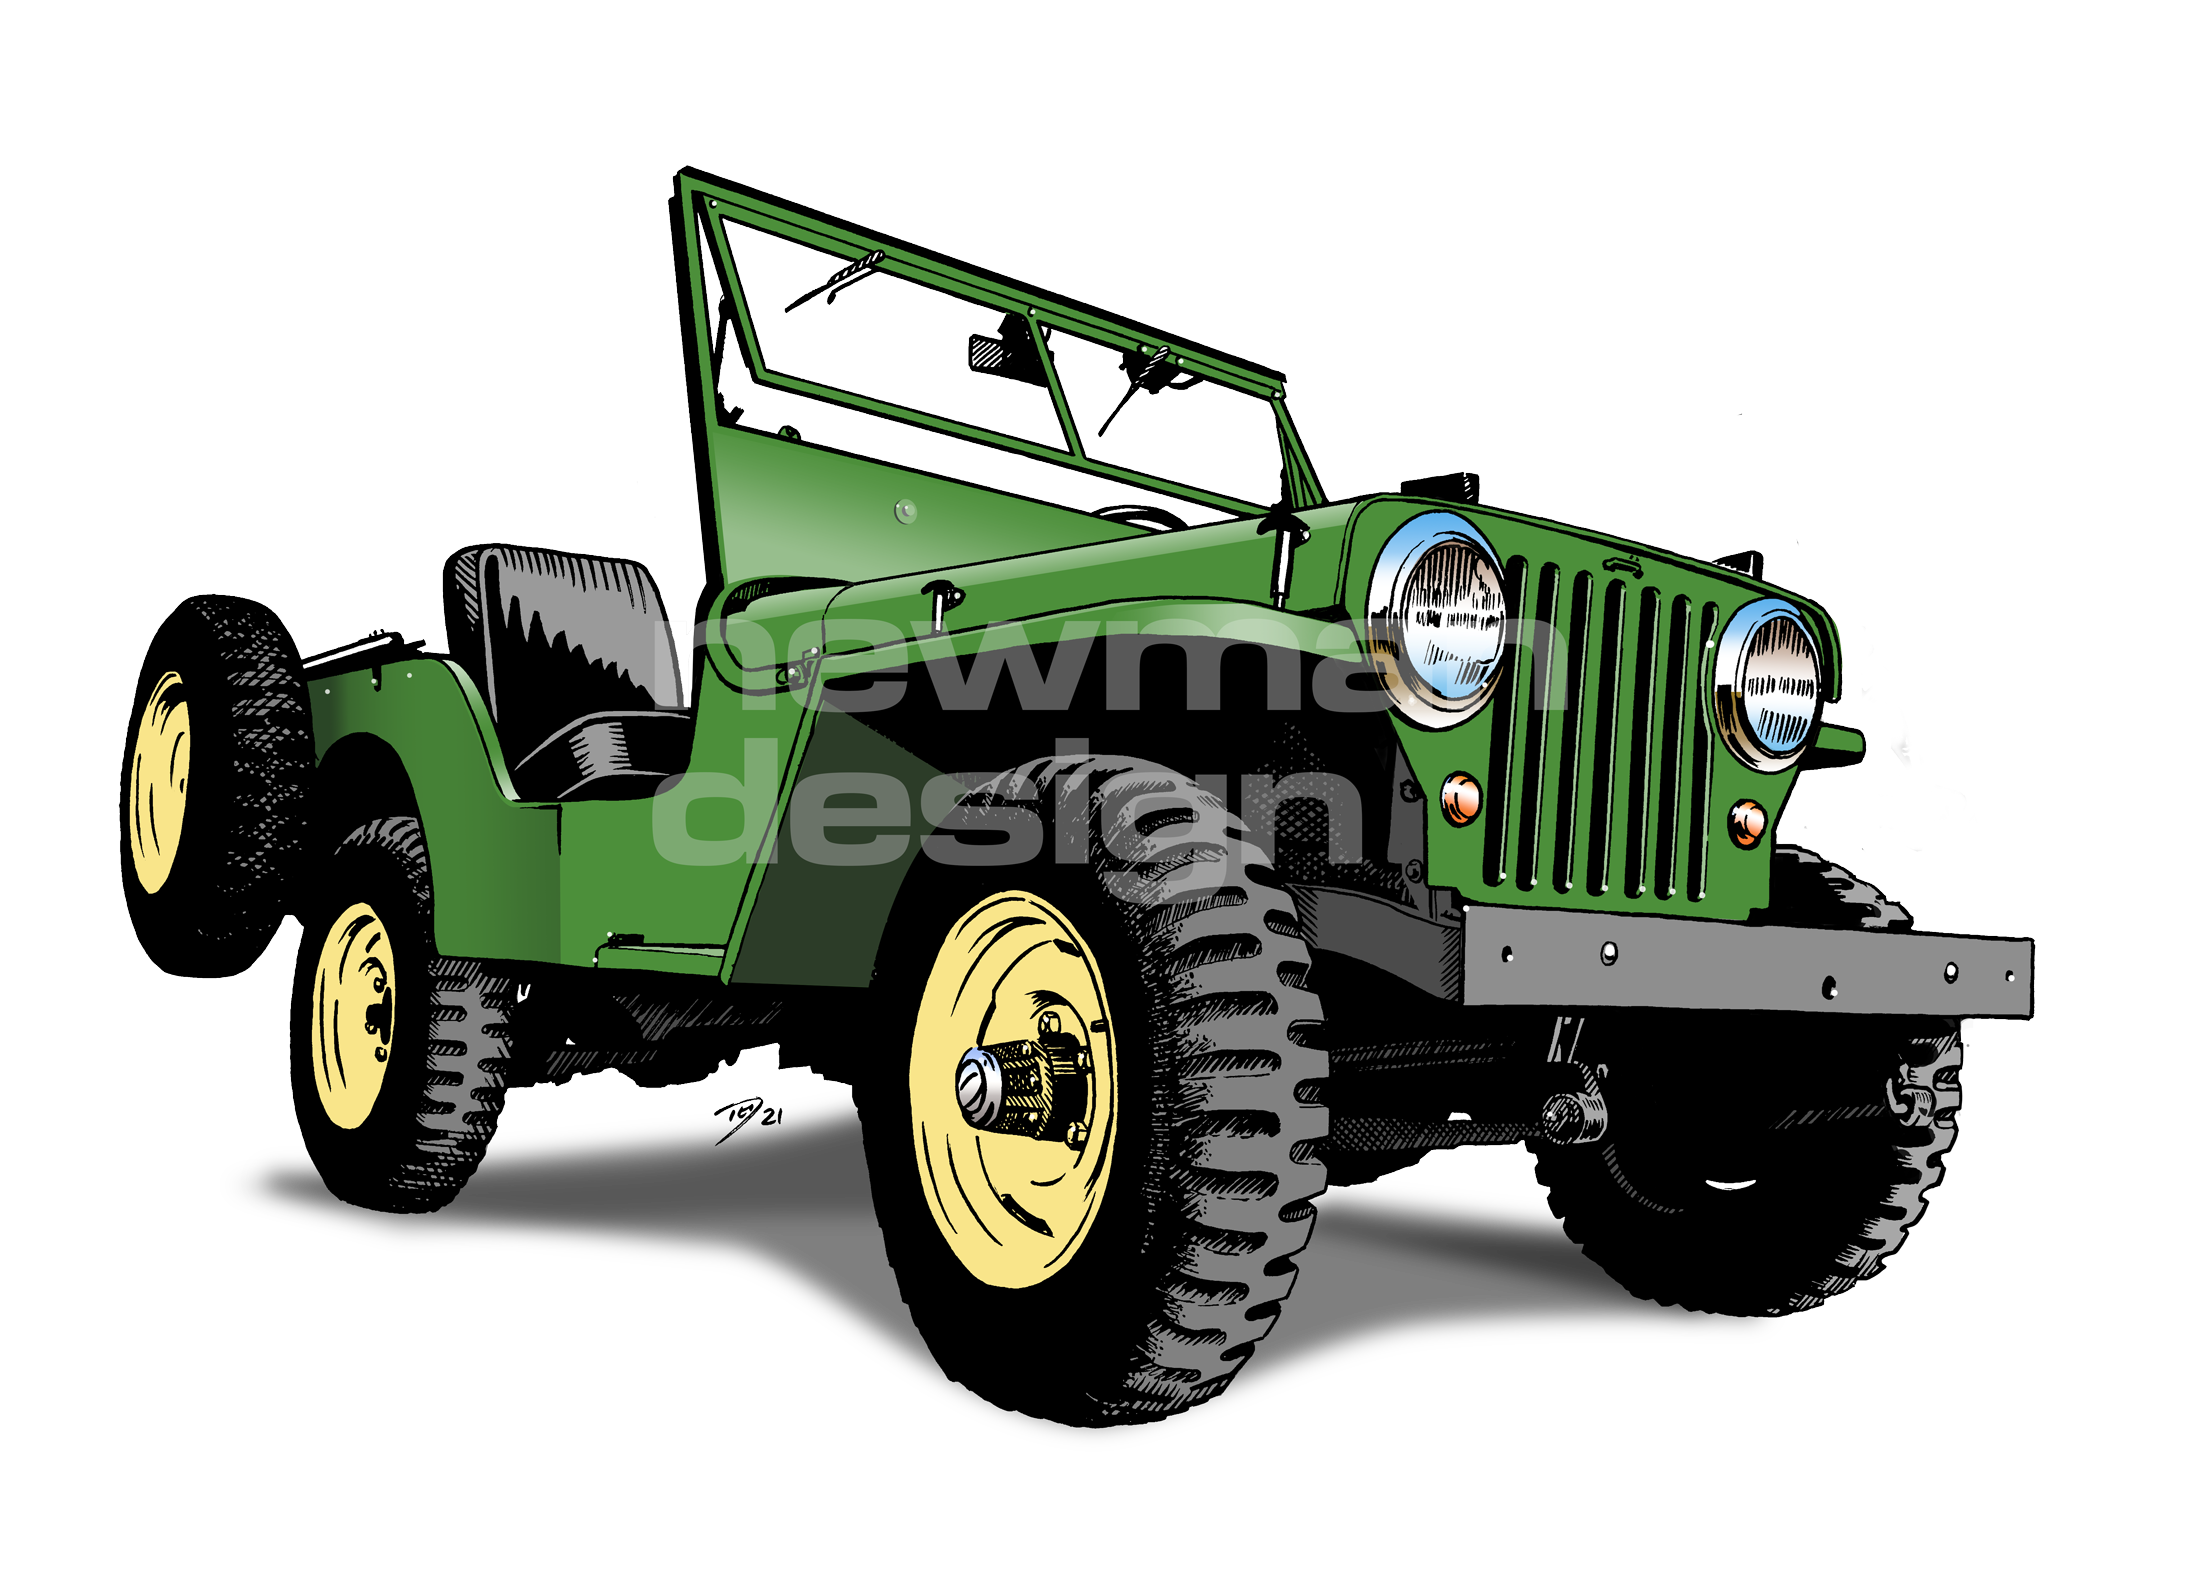 Willys Jeep cj2a pasture green